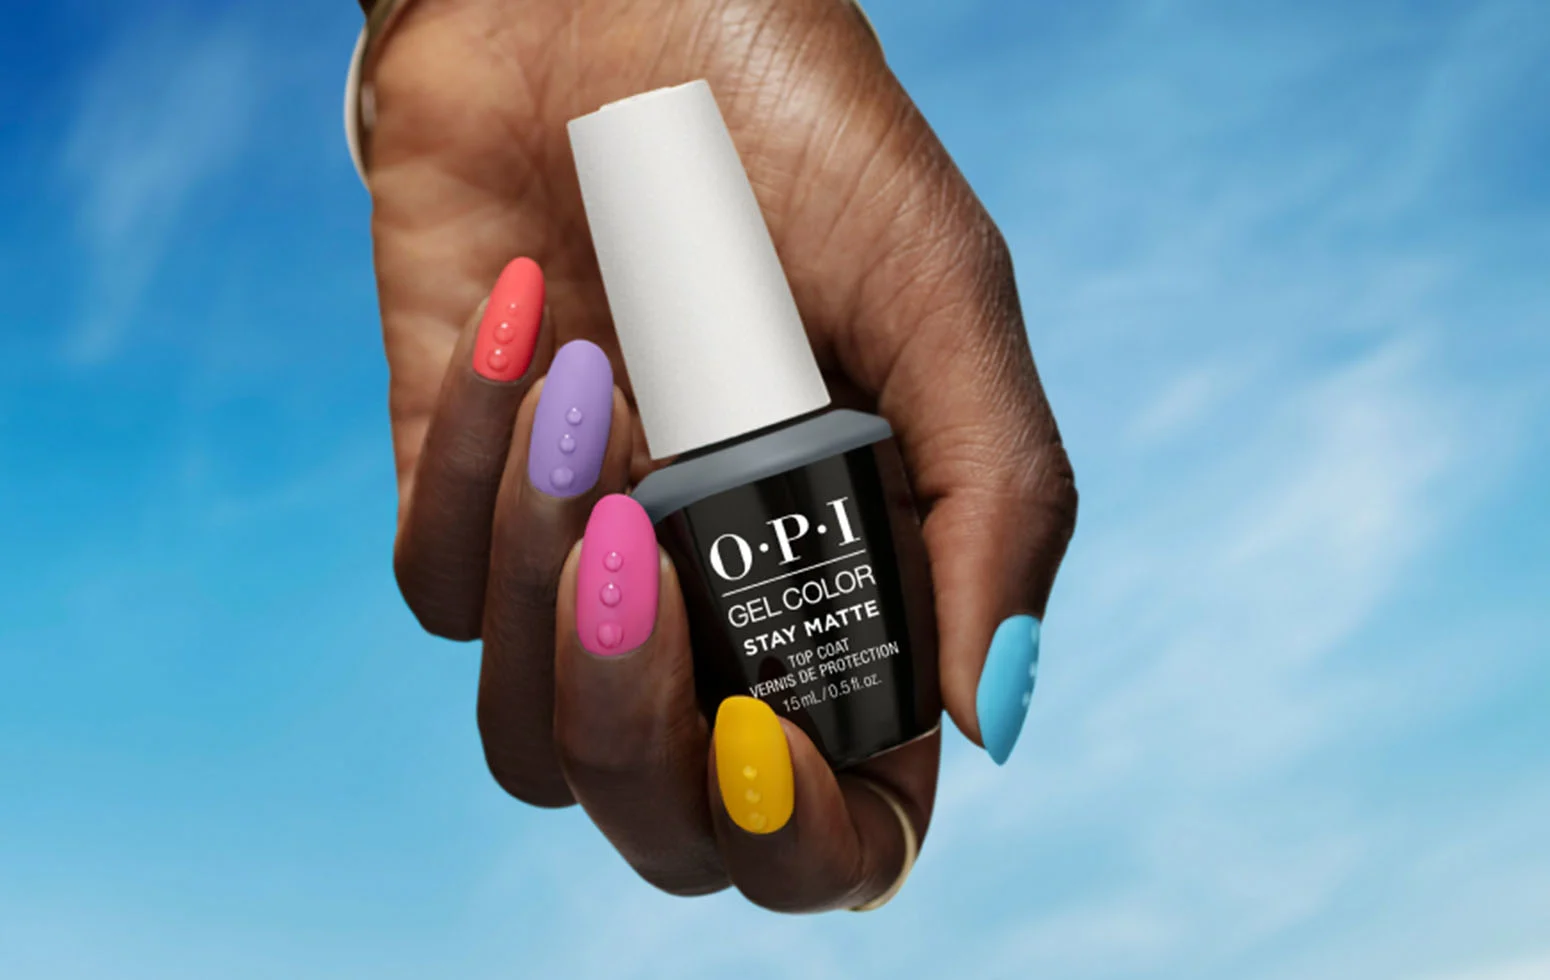 Give Clients Pure Matteisfaction with the New OPI GelColor Stay Matte Top Coat